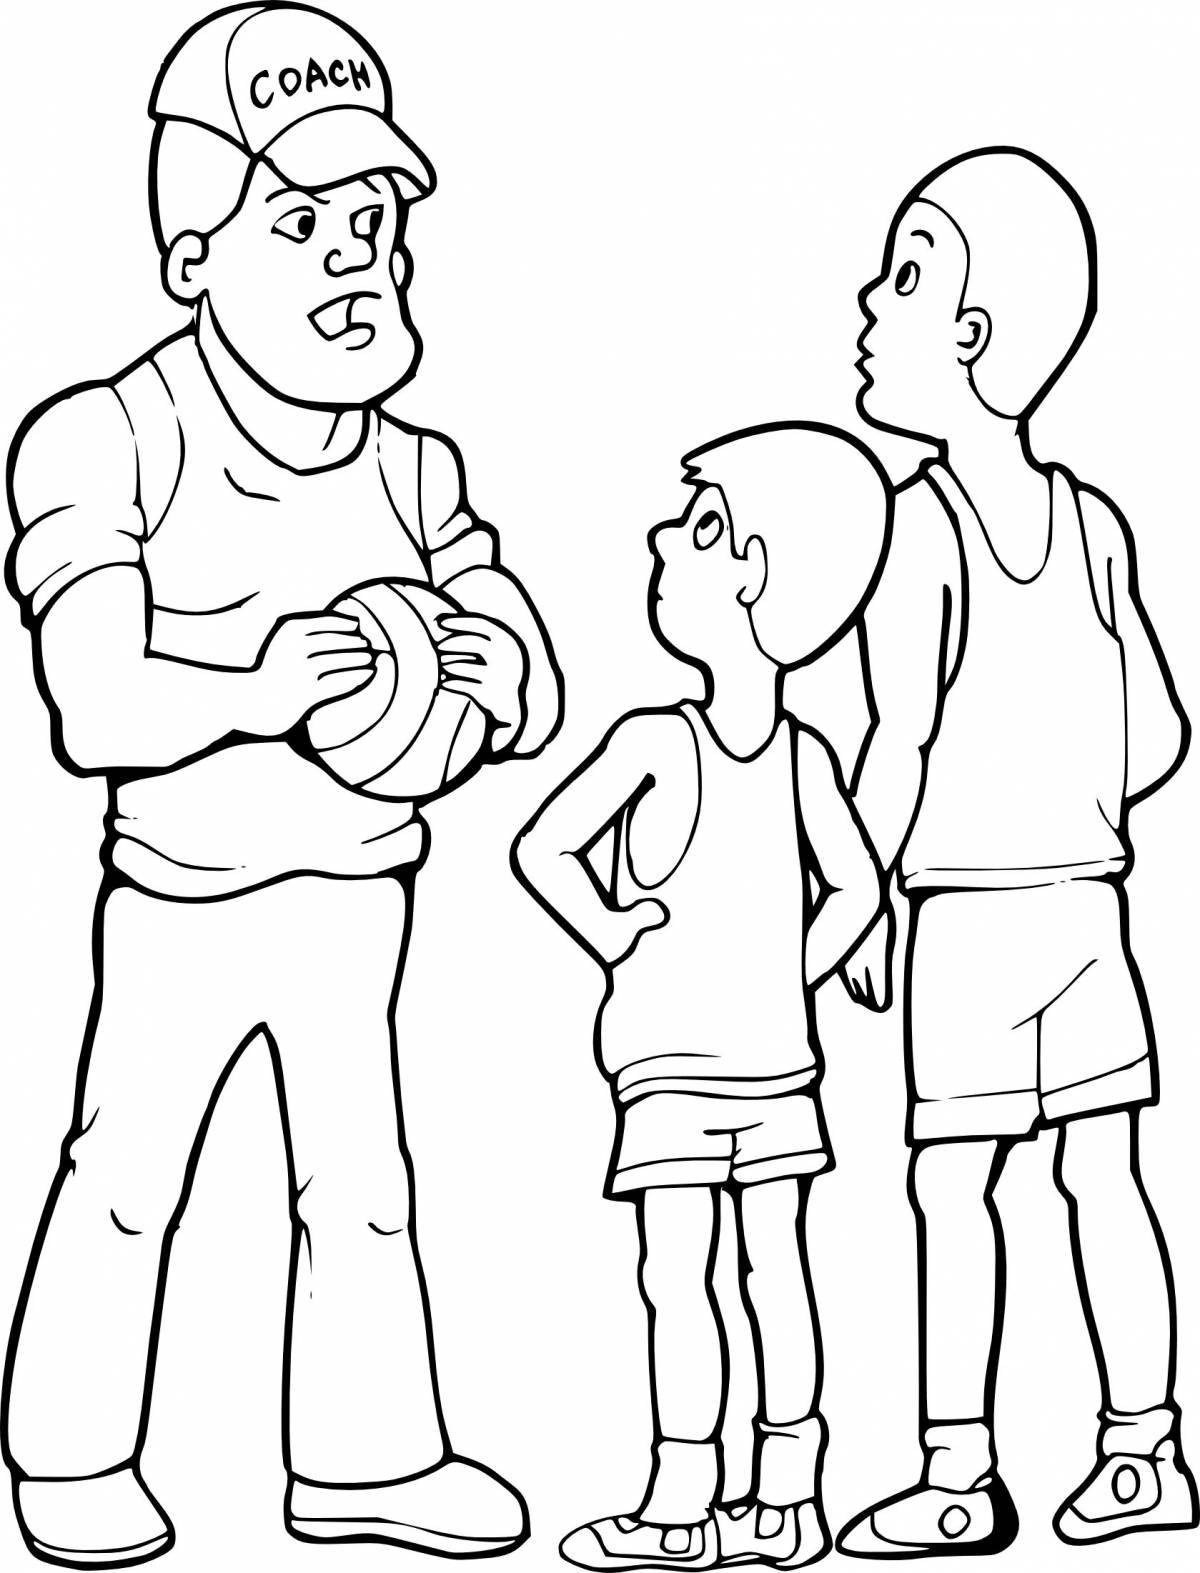 Animated sports family coloring book